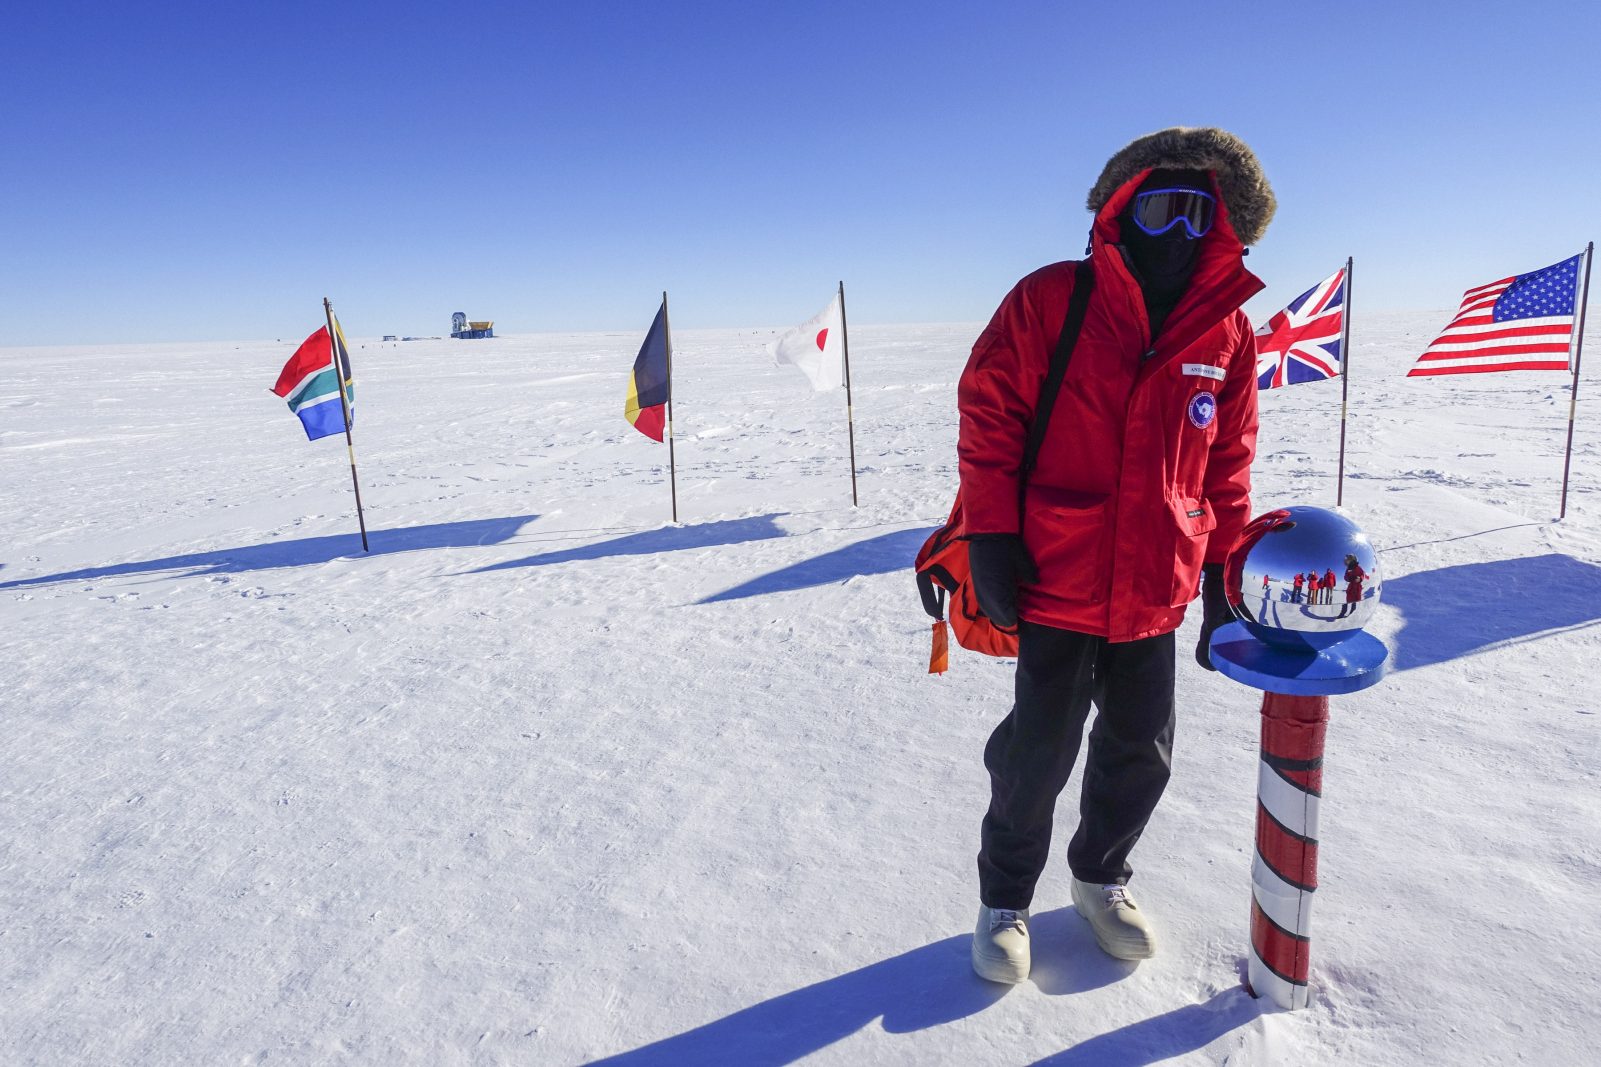 Can You Survive an Entire Week in the Antarctica Alone? abpu_s8_antarctica1